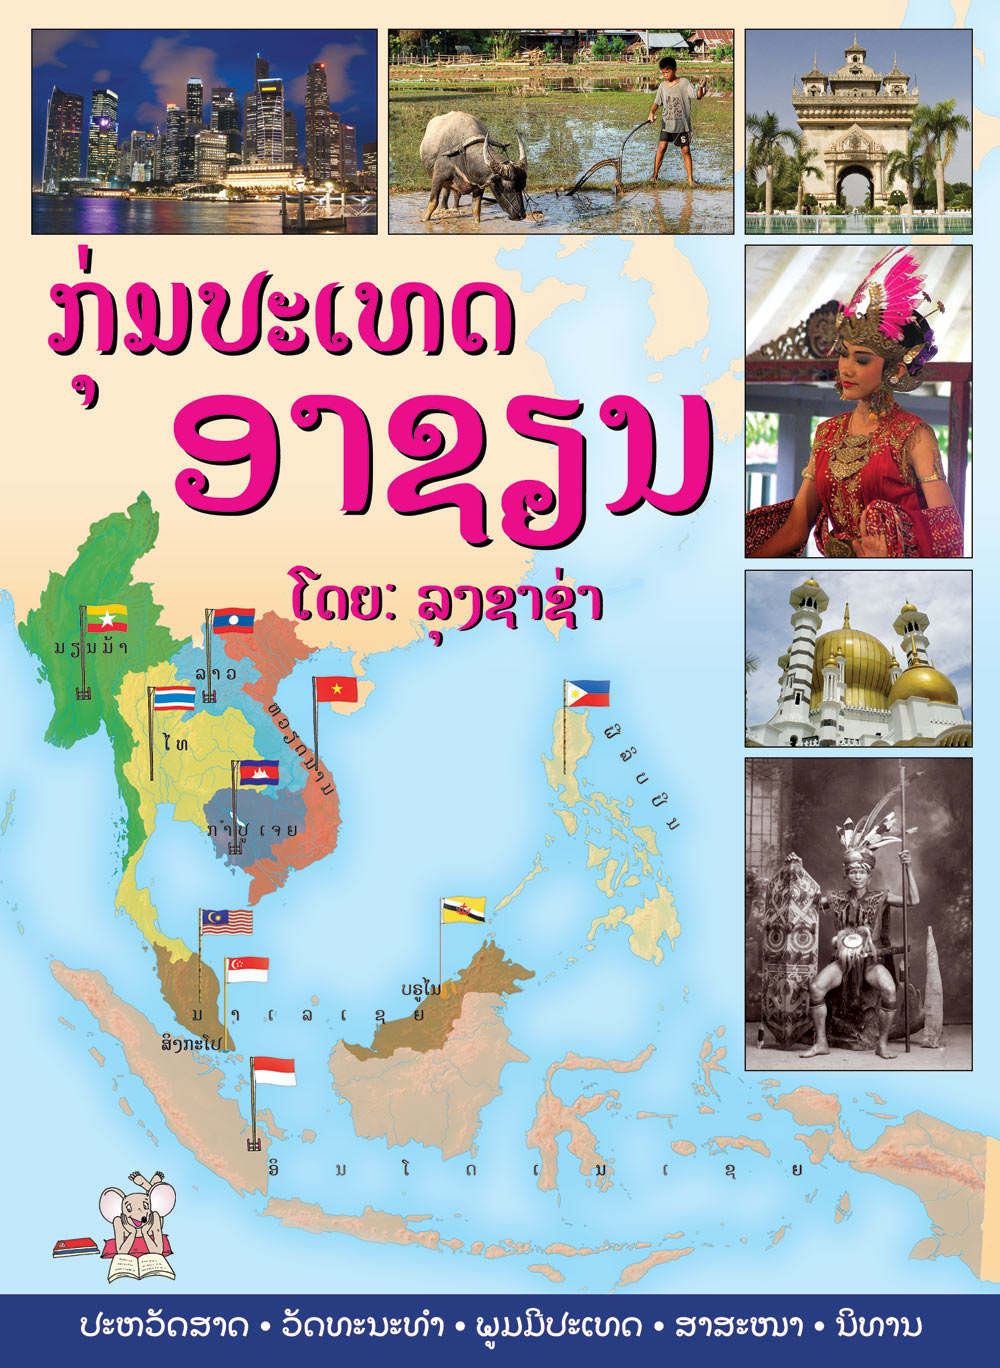 Countries of ASEAN large book cover, published in Lao language